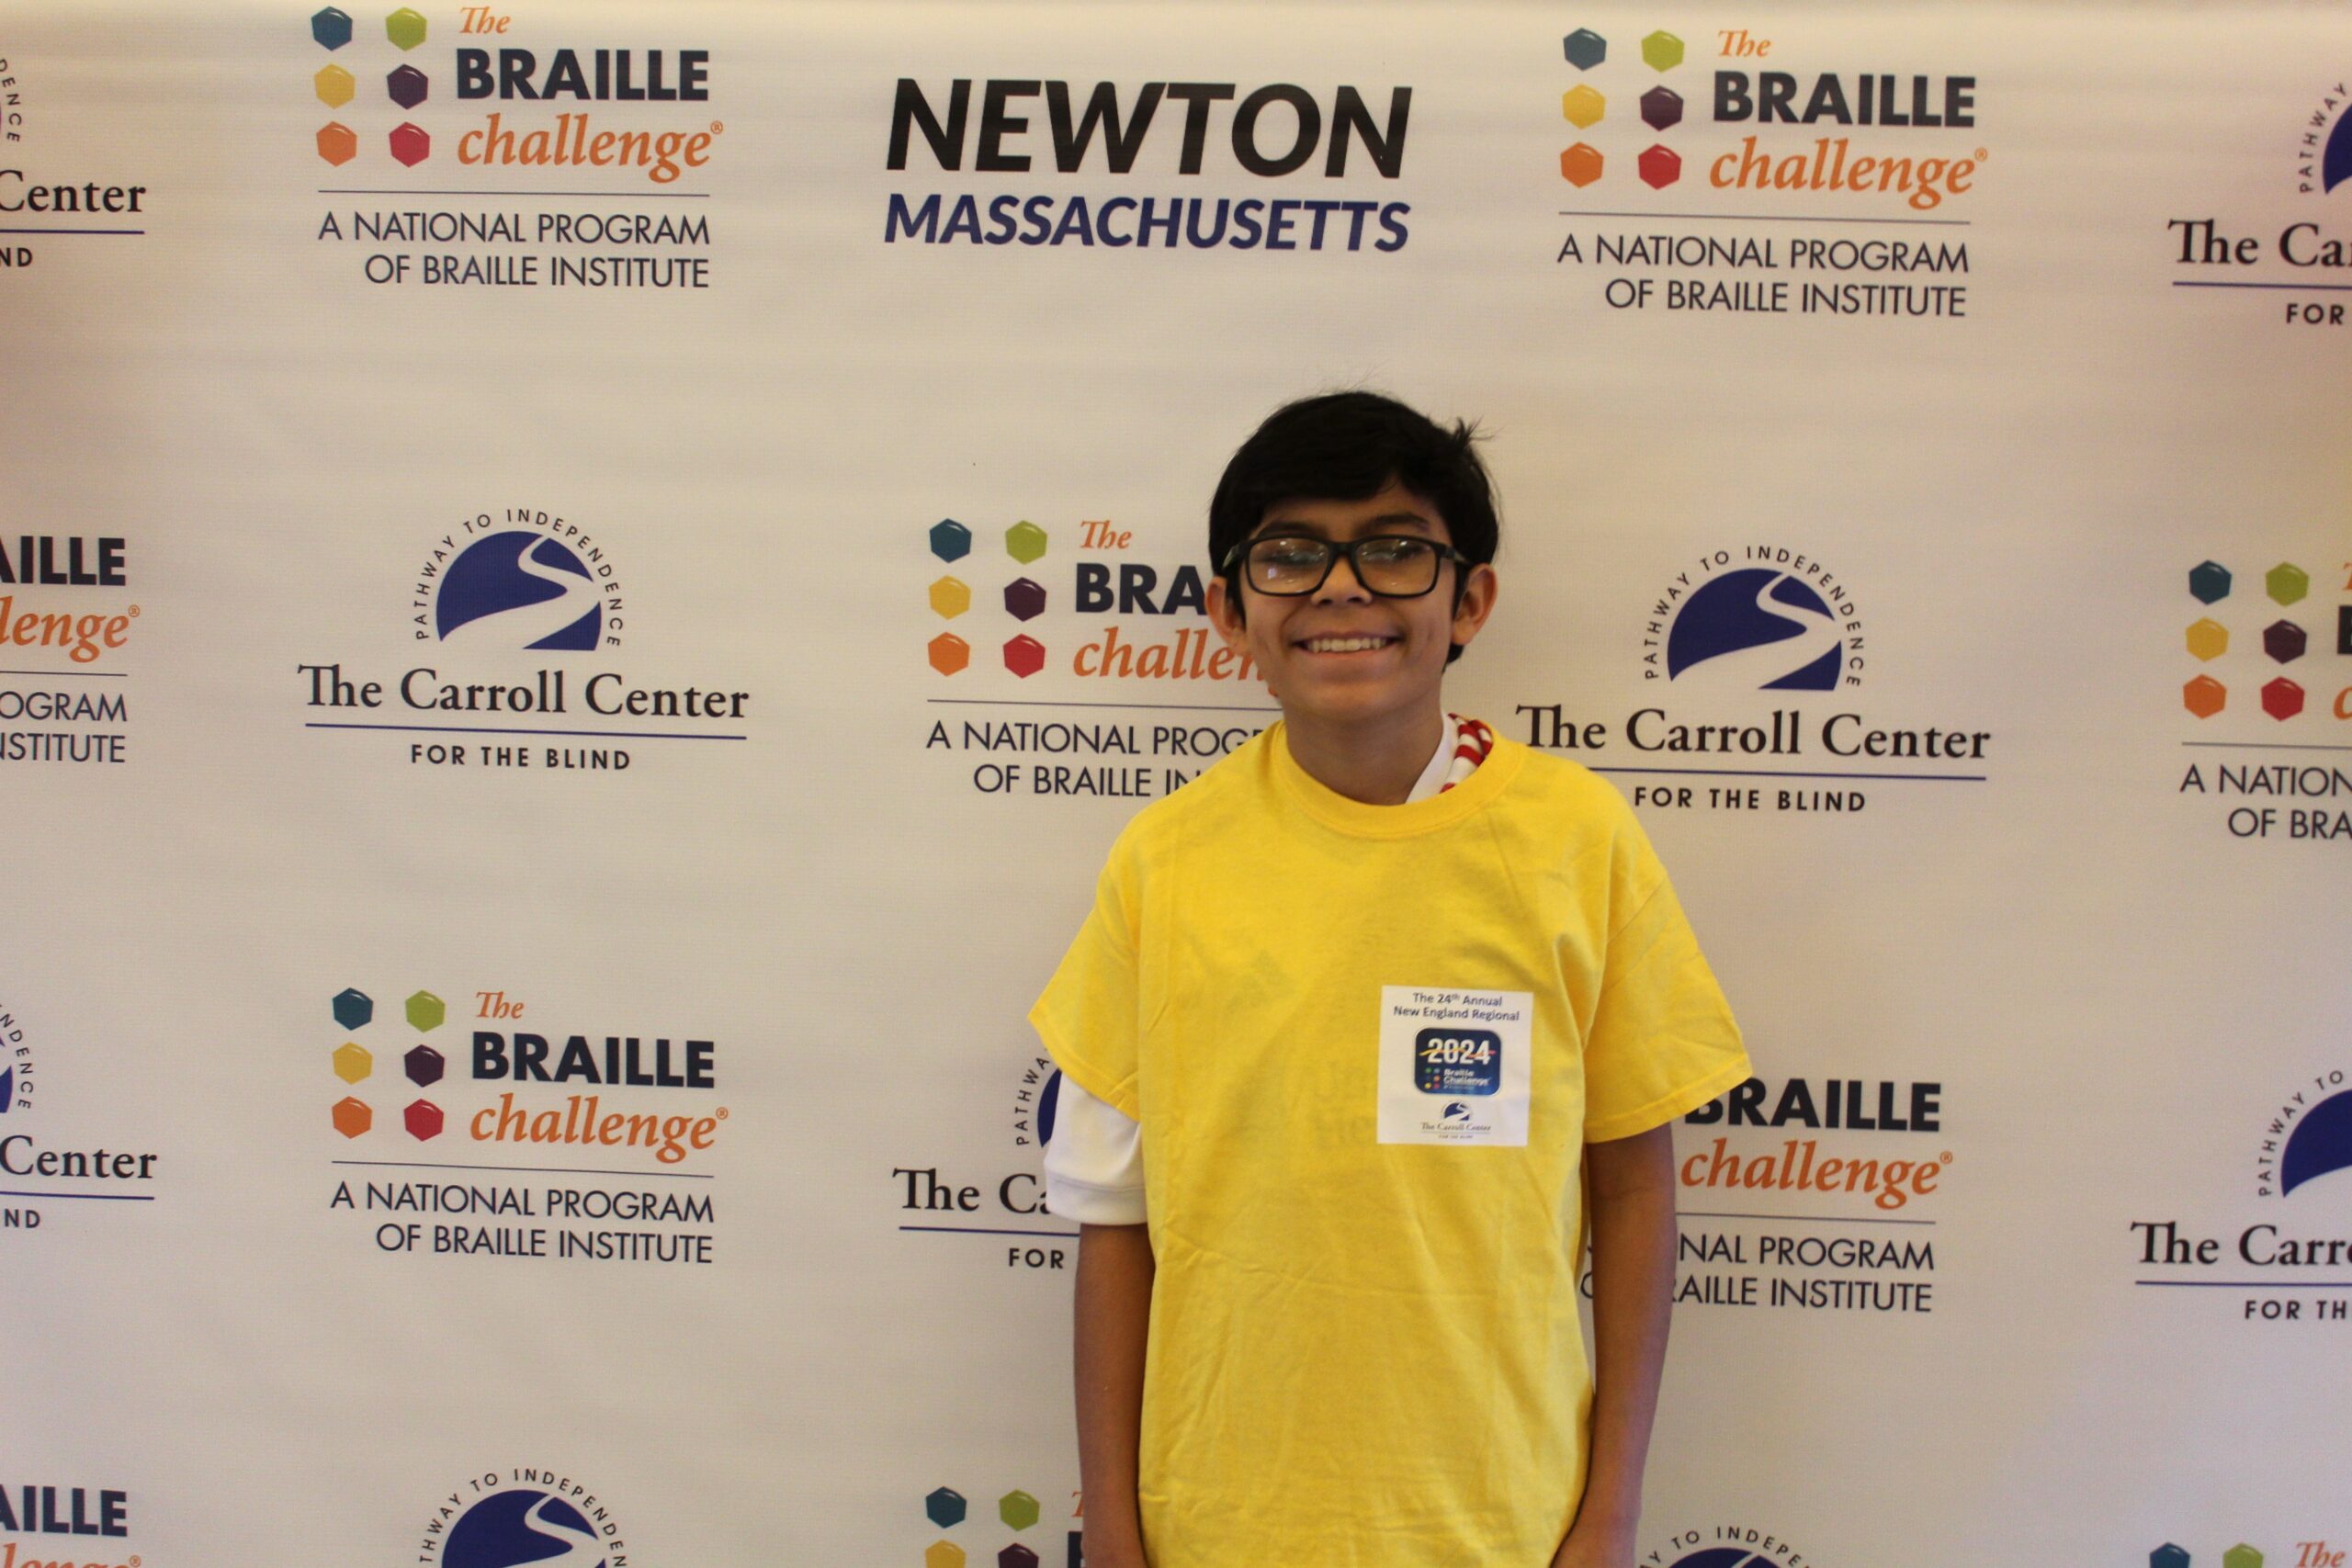 Braille Challenge participant smiling for a photo in front of the Carroll Center Braille Challenge backdrop